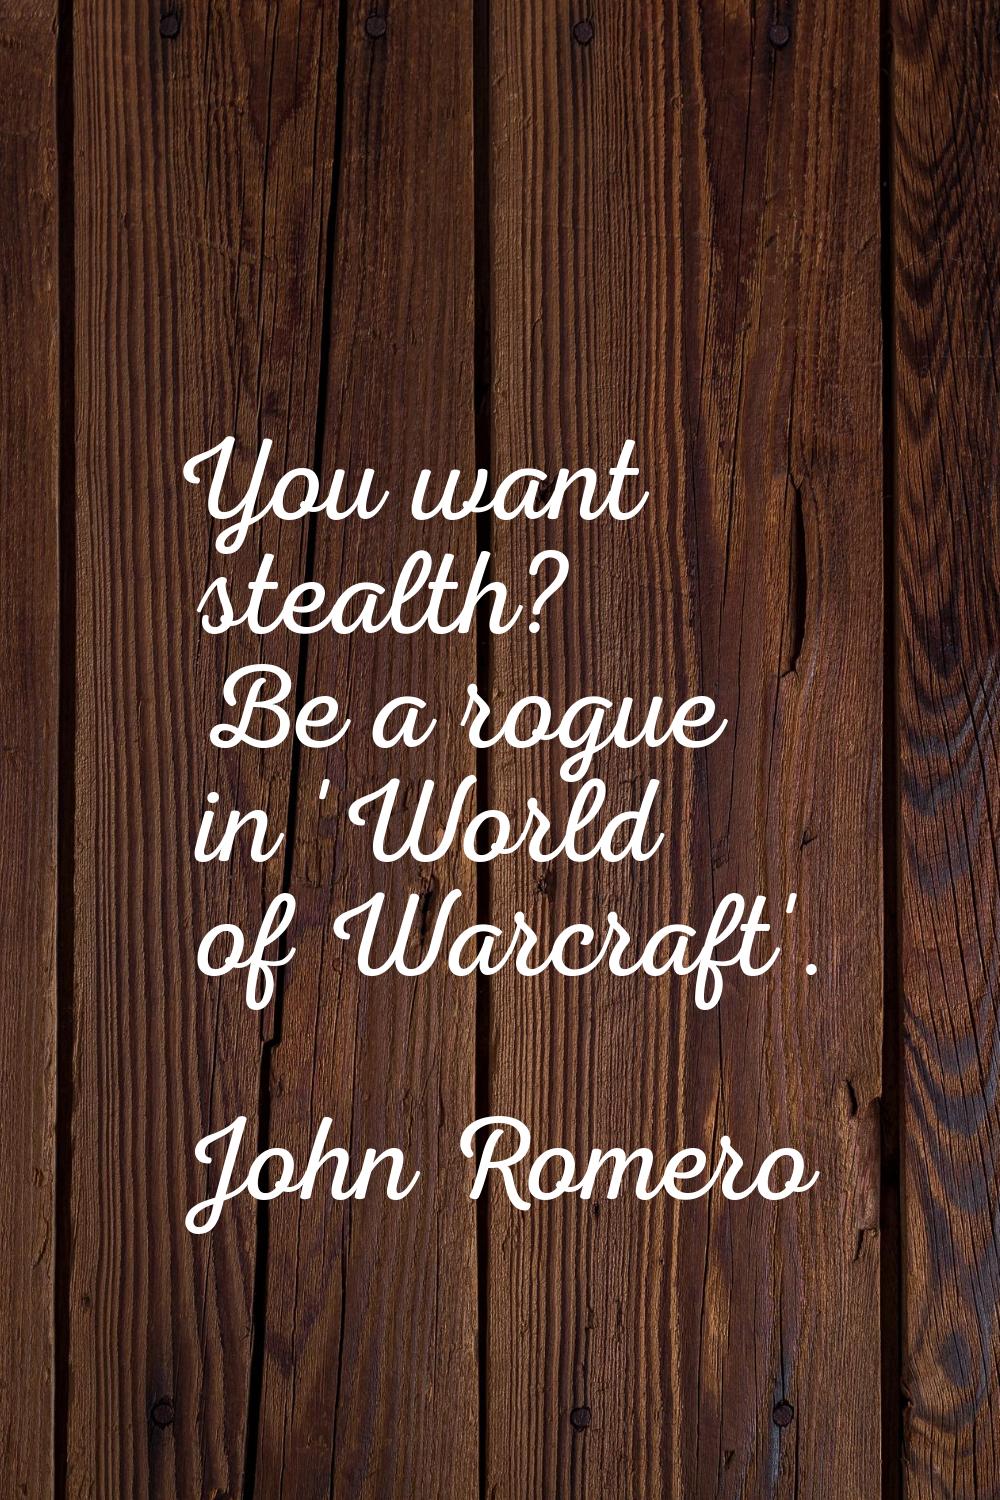 You want stealth? Be a rogue in 'World of Warcraft'.